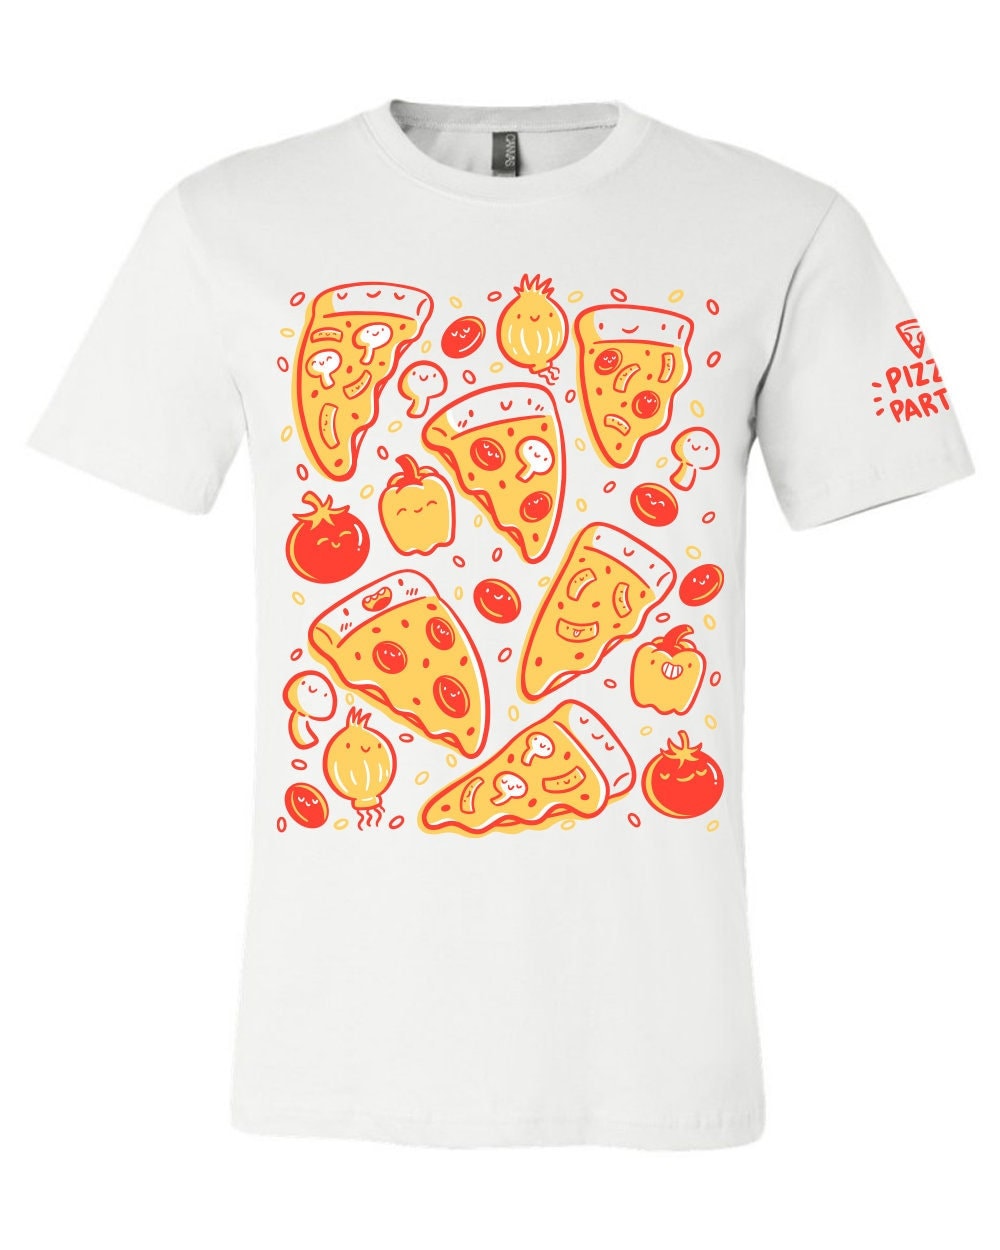 Pizza Party Shirt